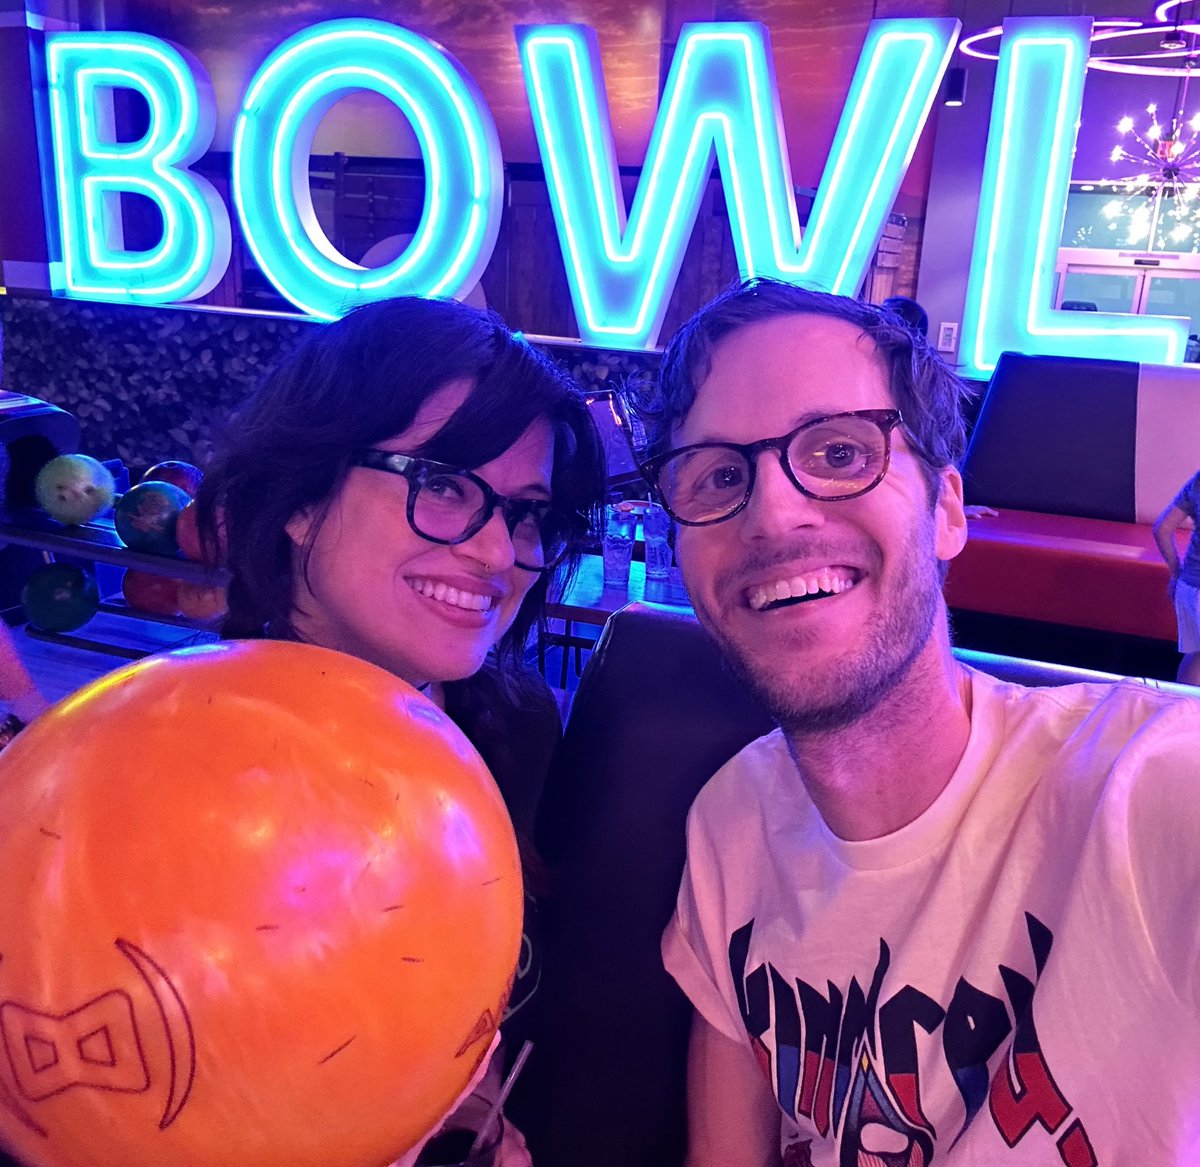 happy birthday to my BFF @caseybboy! (the B stands for bowling)